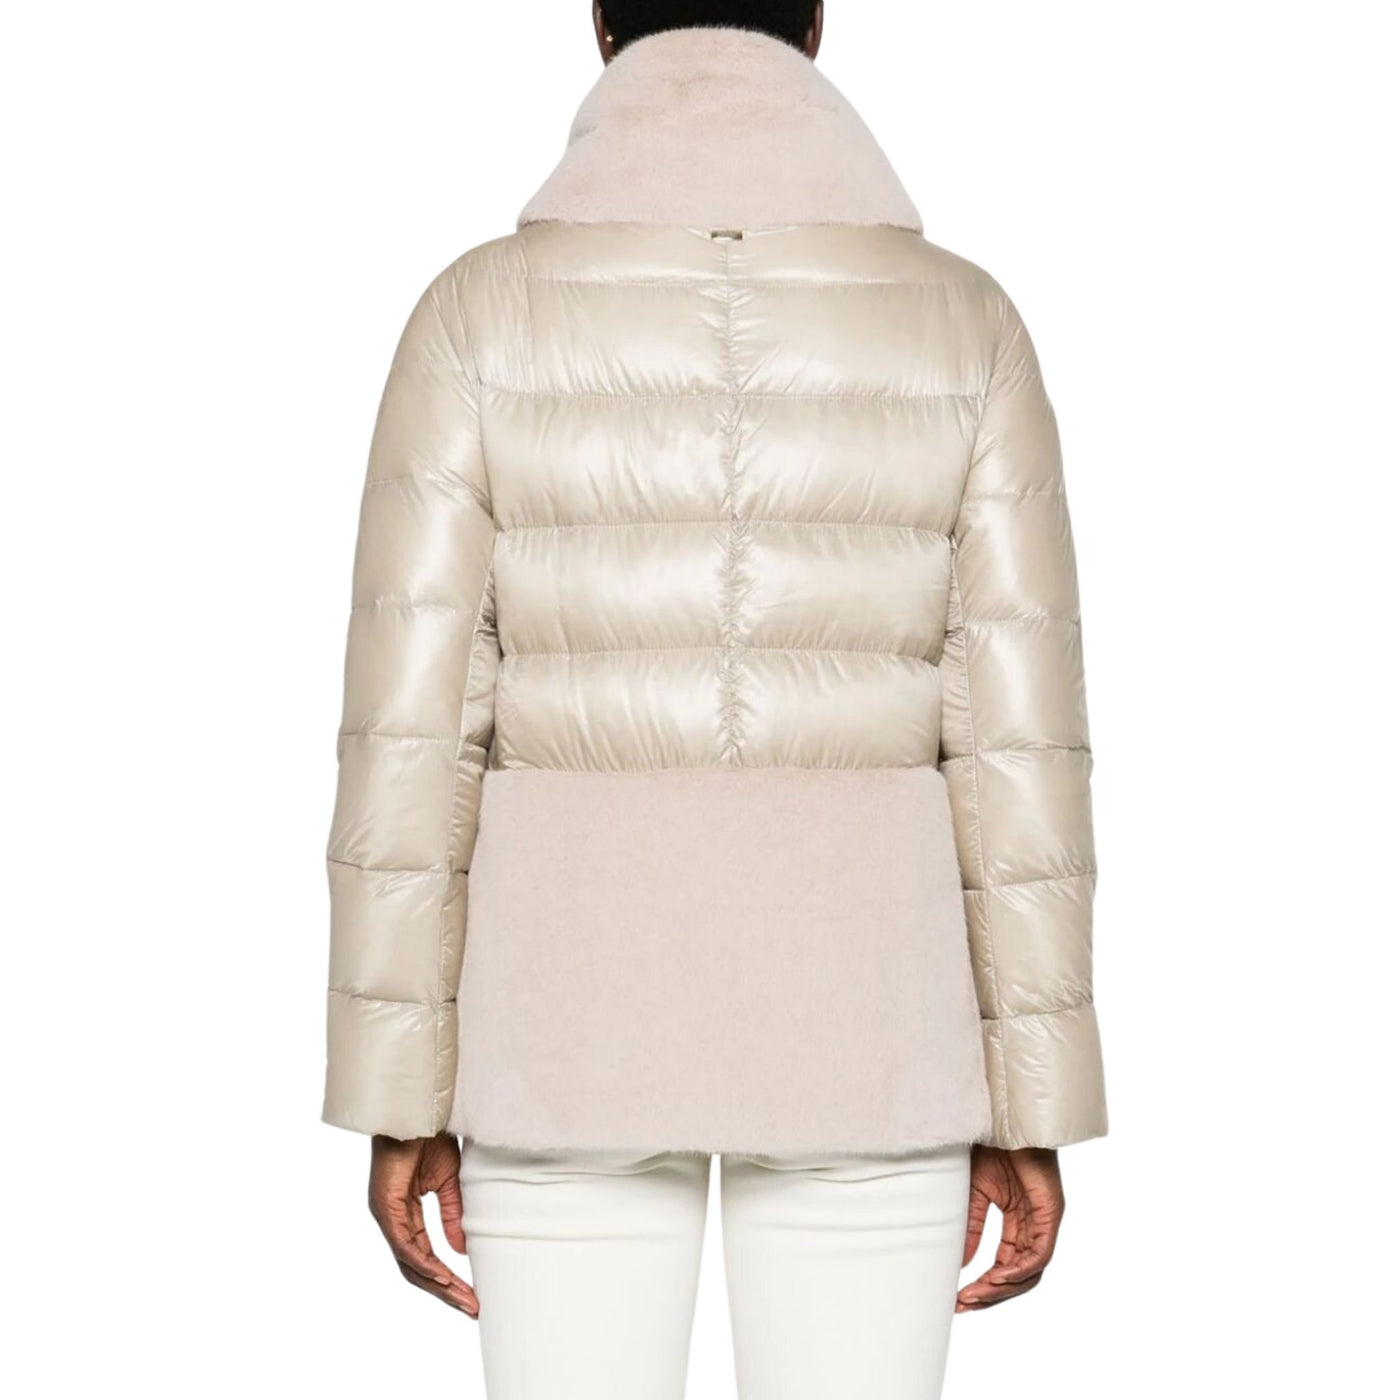 Women's jacket with fur inserts